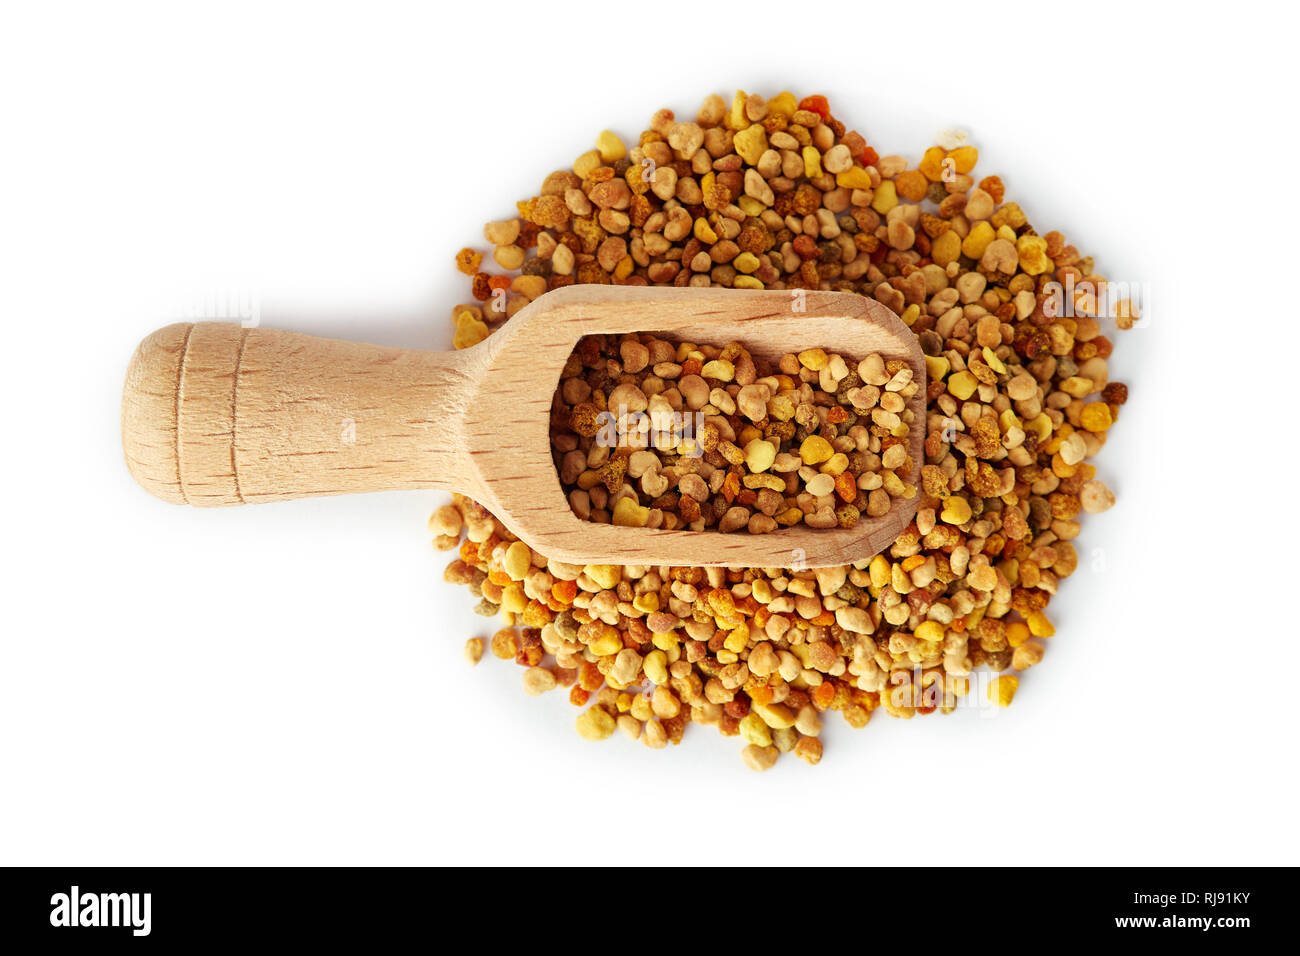 Bee pollen grains in wooden scoop isolated on white background Stock Photo